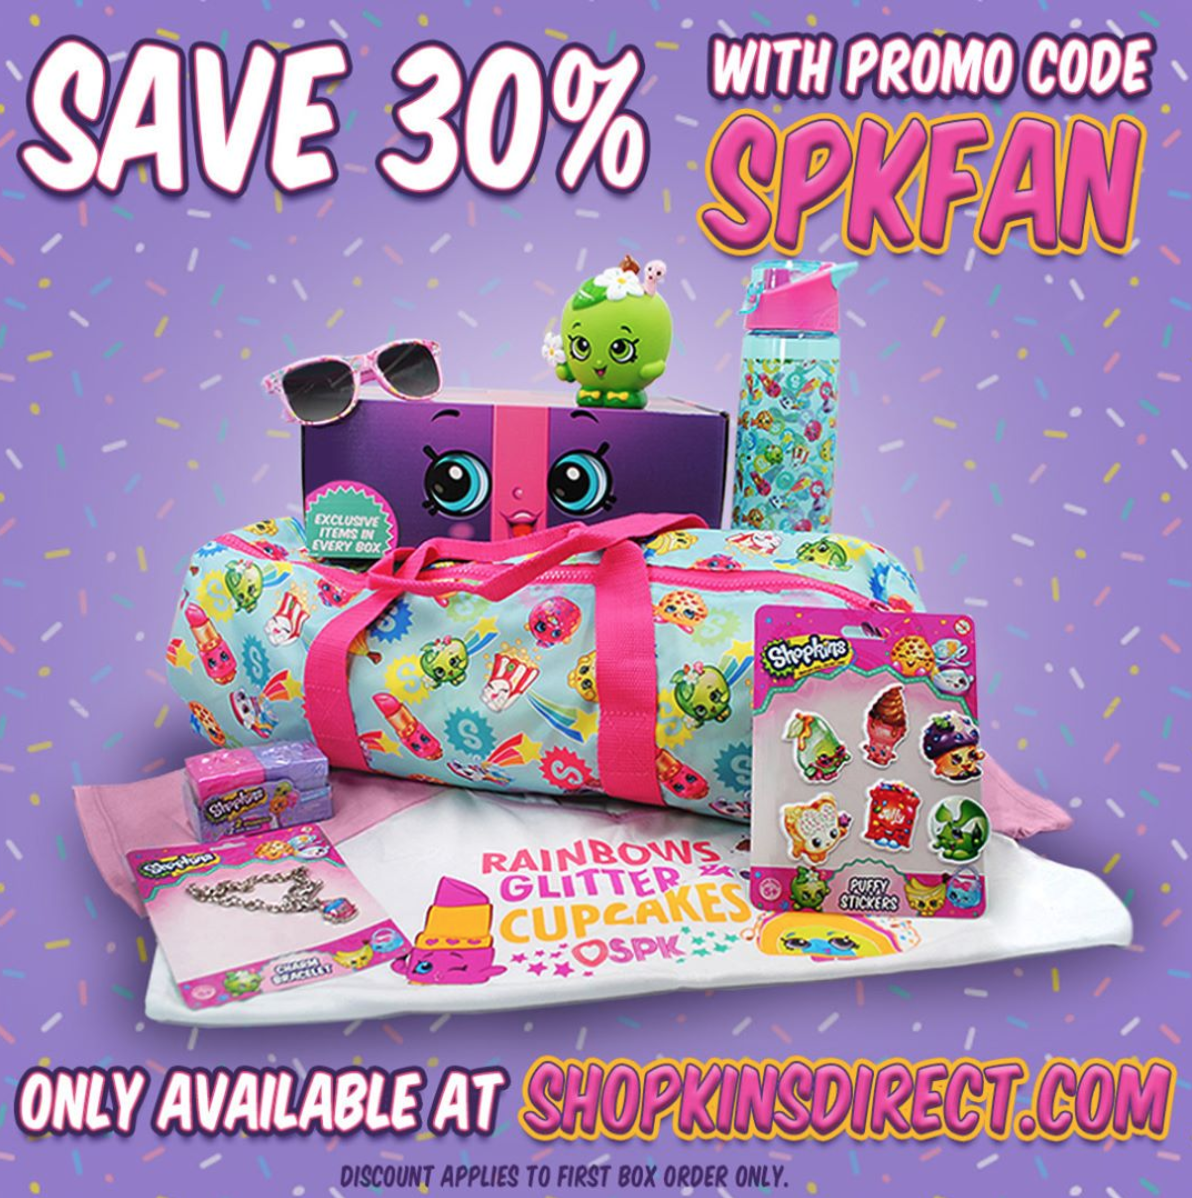 Shopkins Direct Coupon – 30% Off Your First Box!